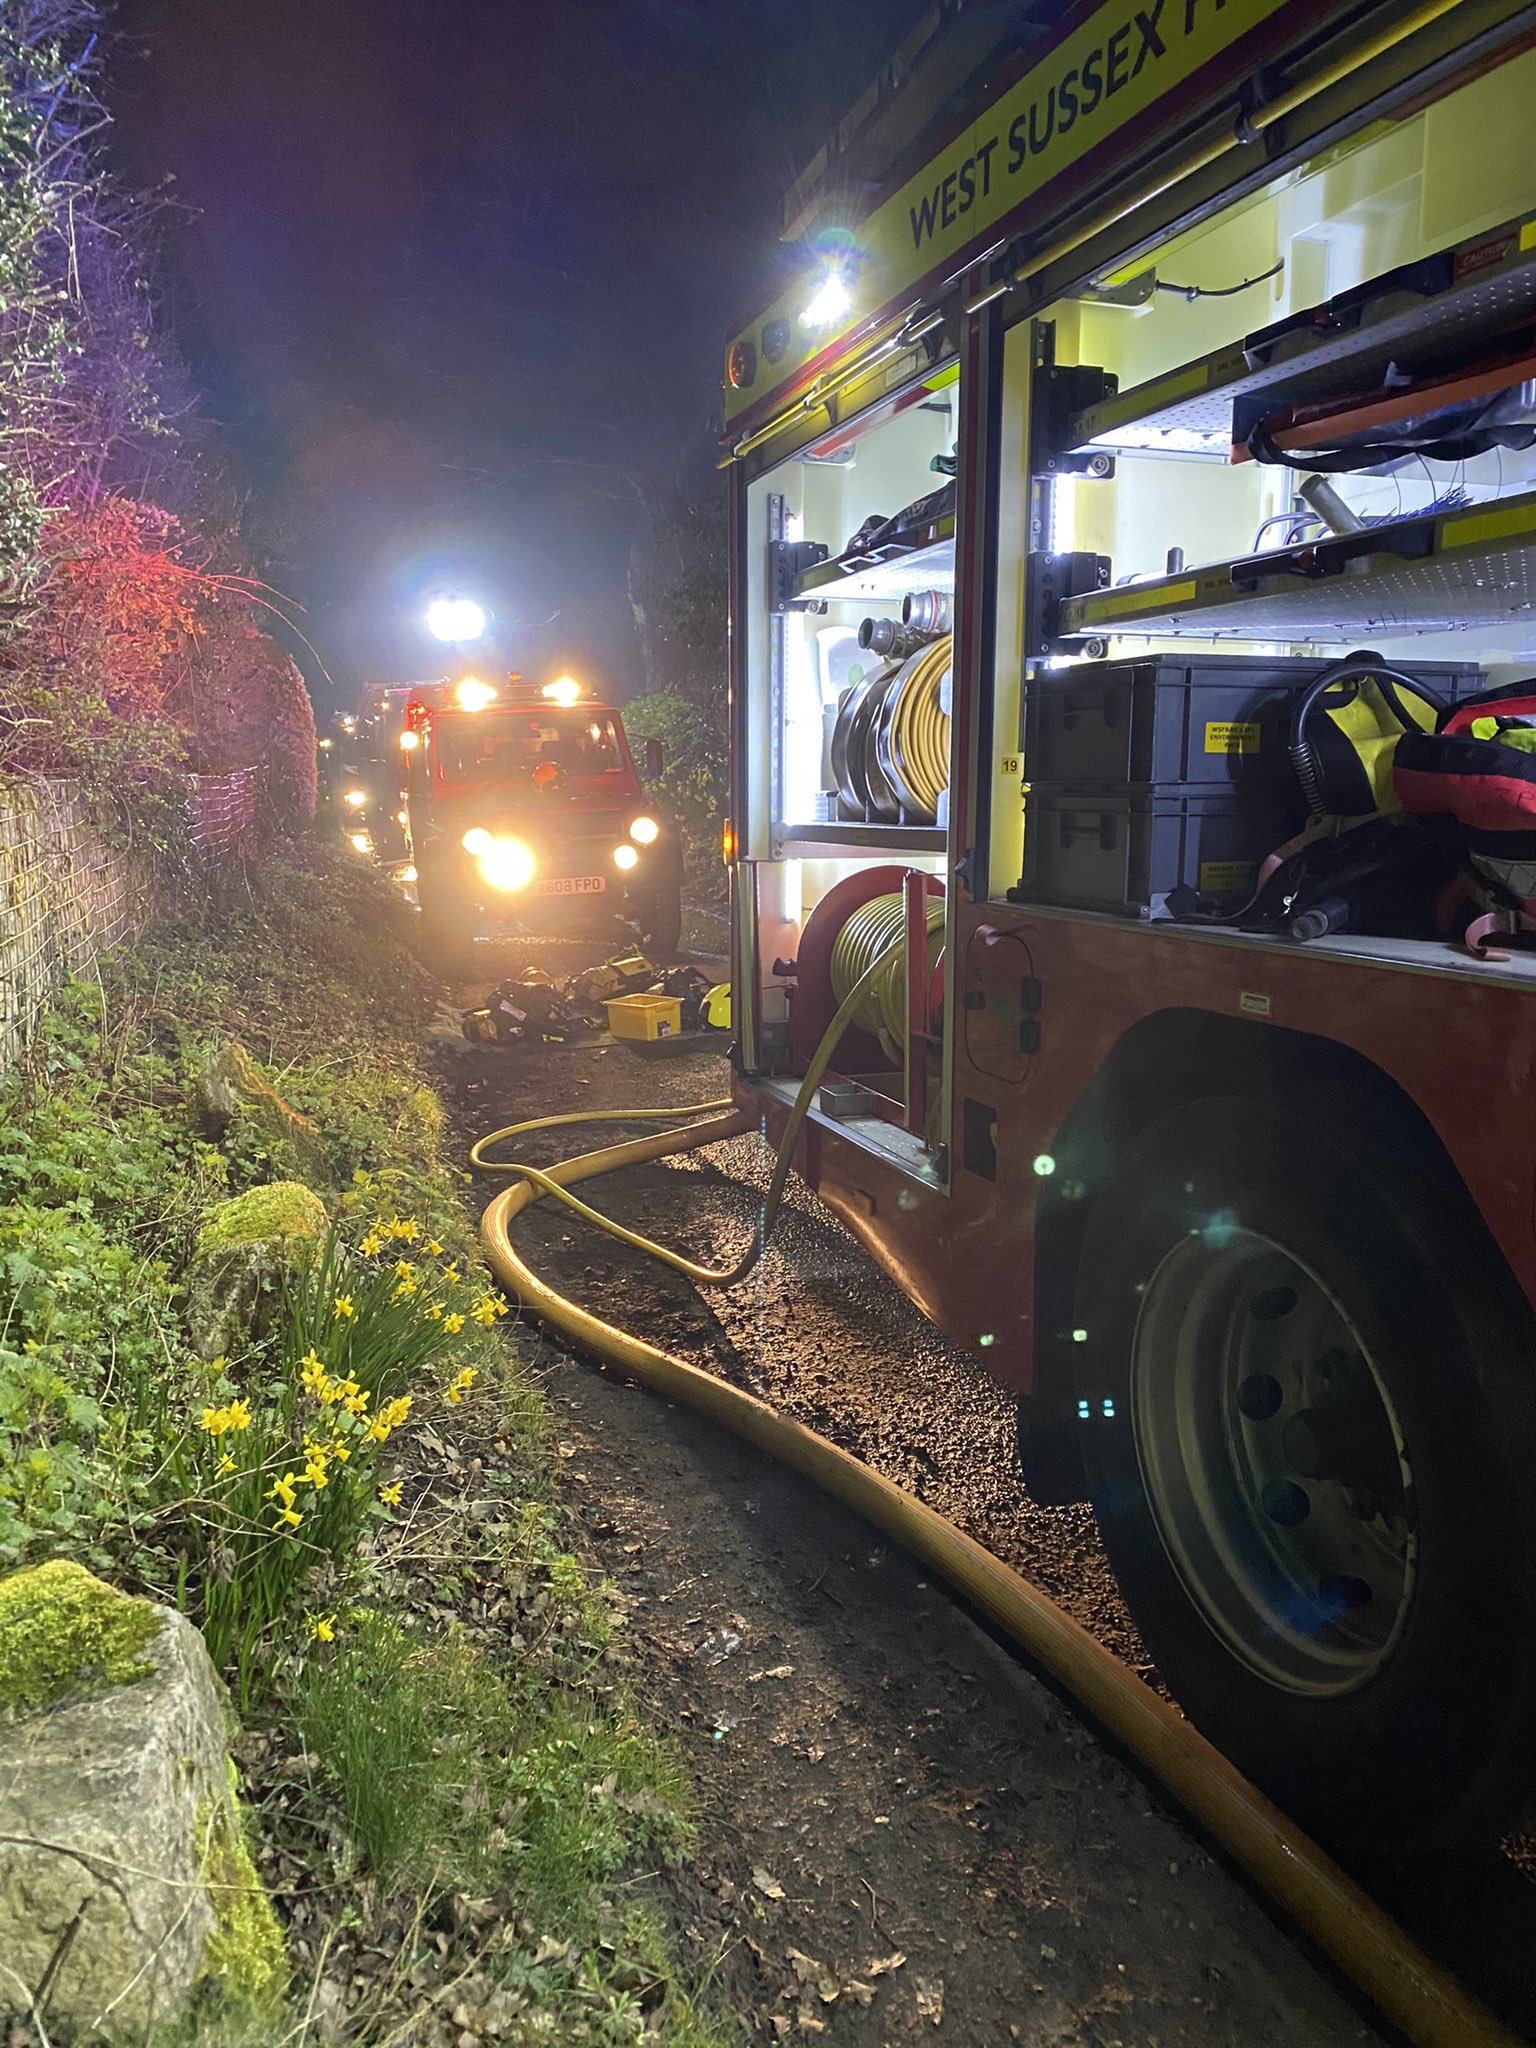 Firefighters worked through the night to battle a fire in Fyning Lane, Rogate Credit: Stn 43 Midhurst